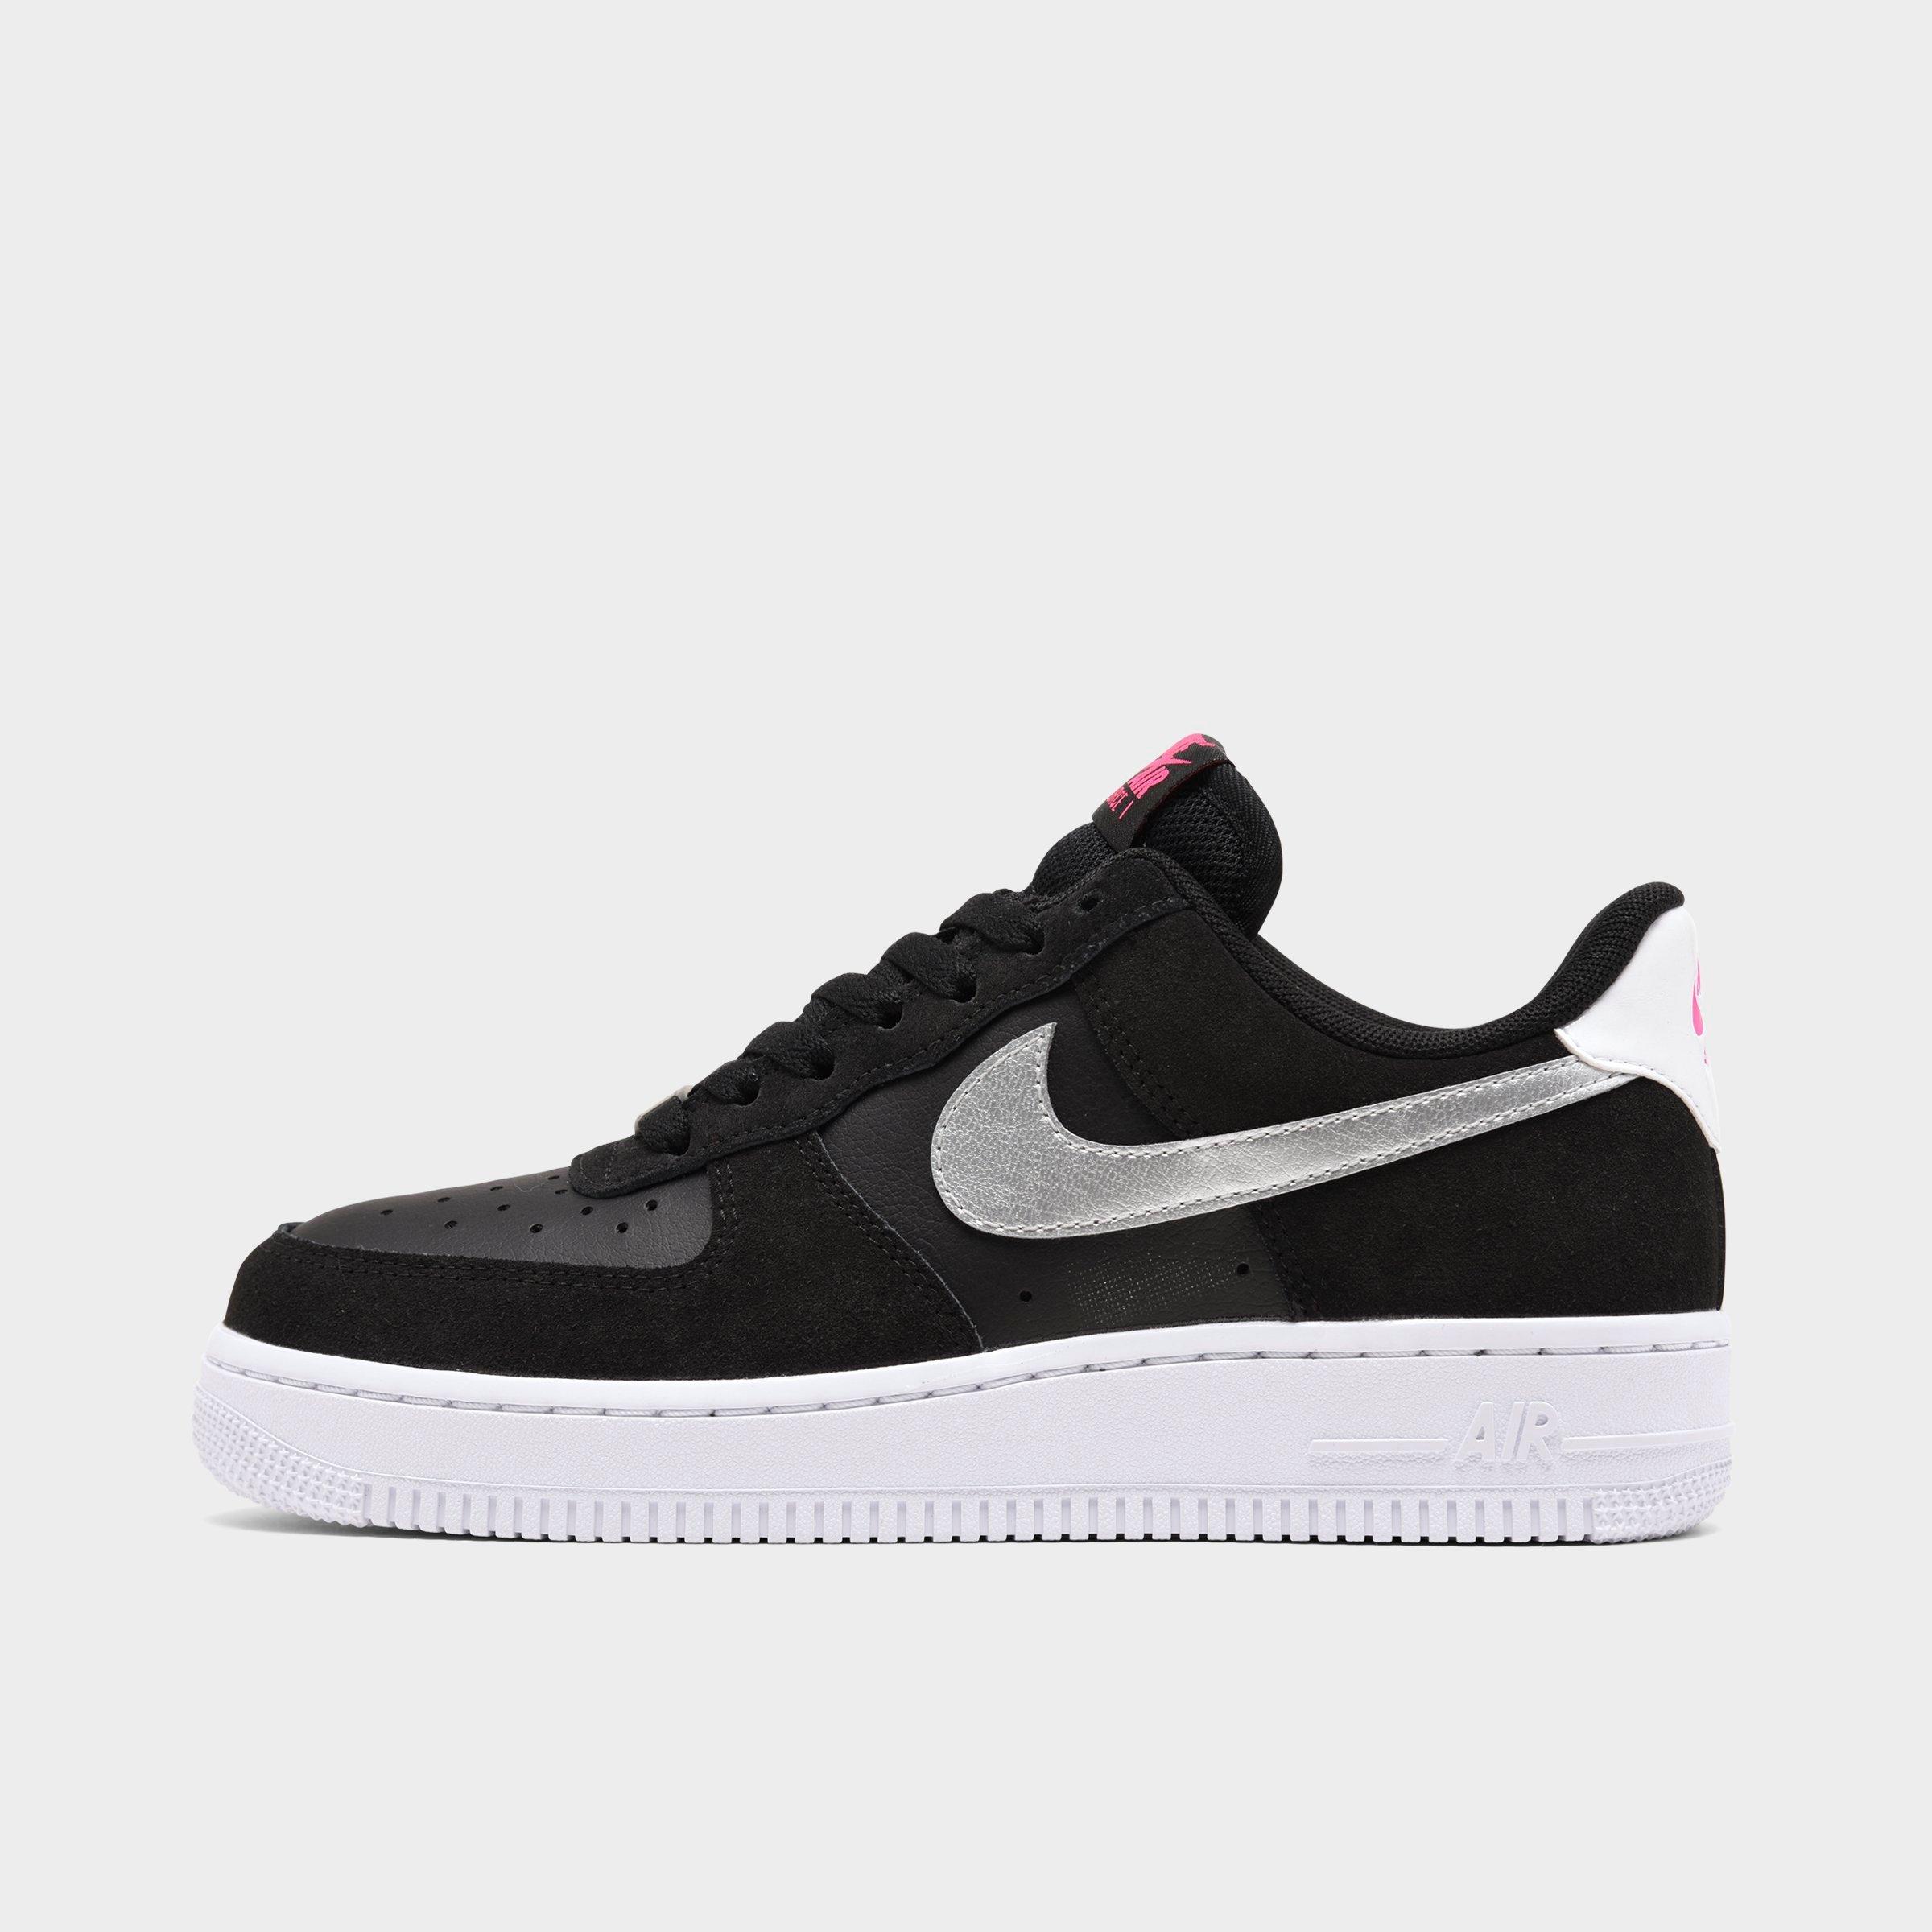 finish line air force ones womens